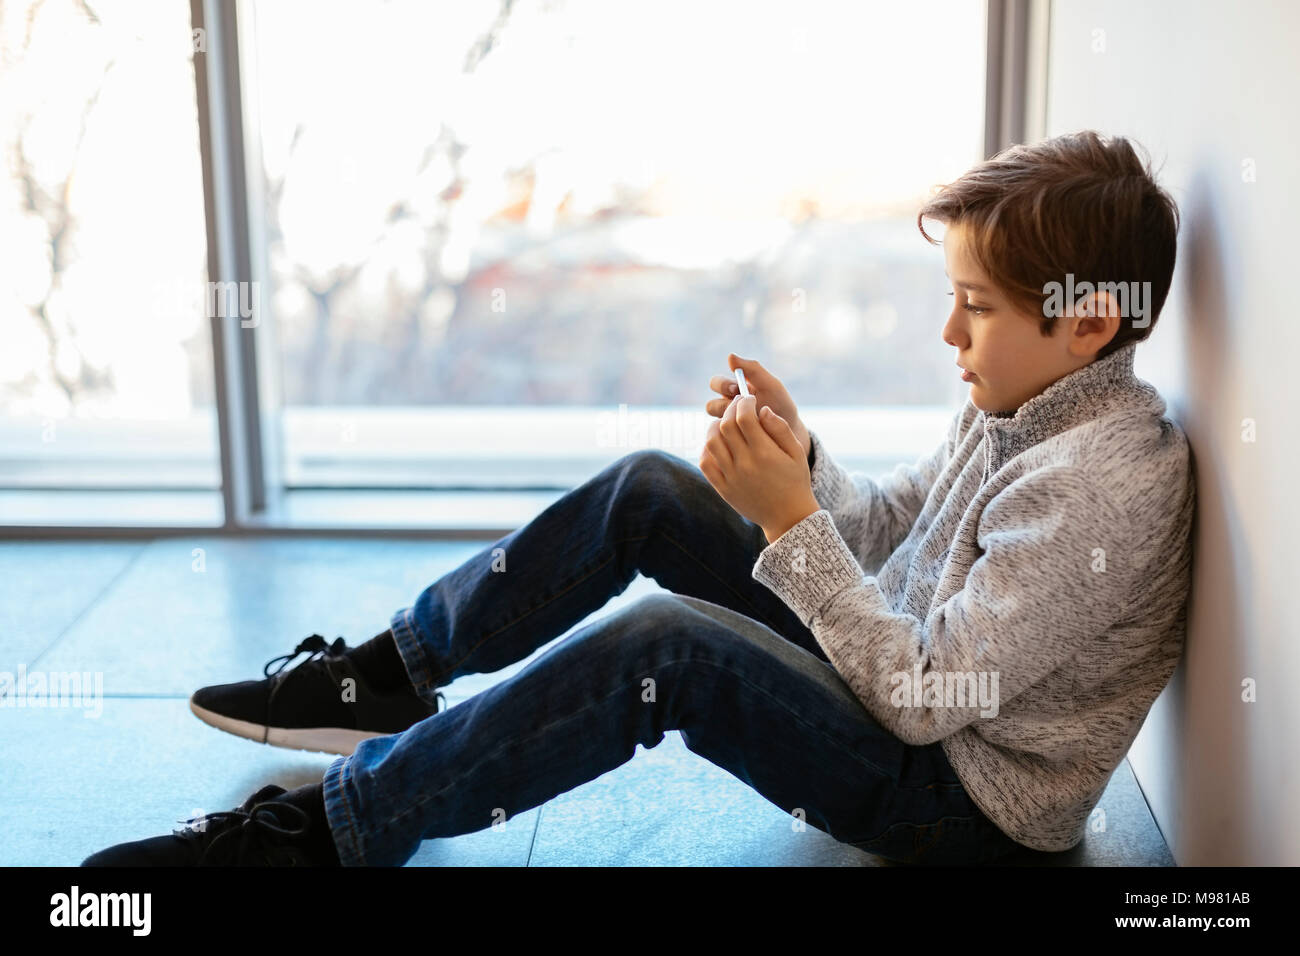 Boy sitting on floor looking at cell phone Stock Photo